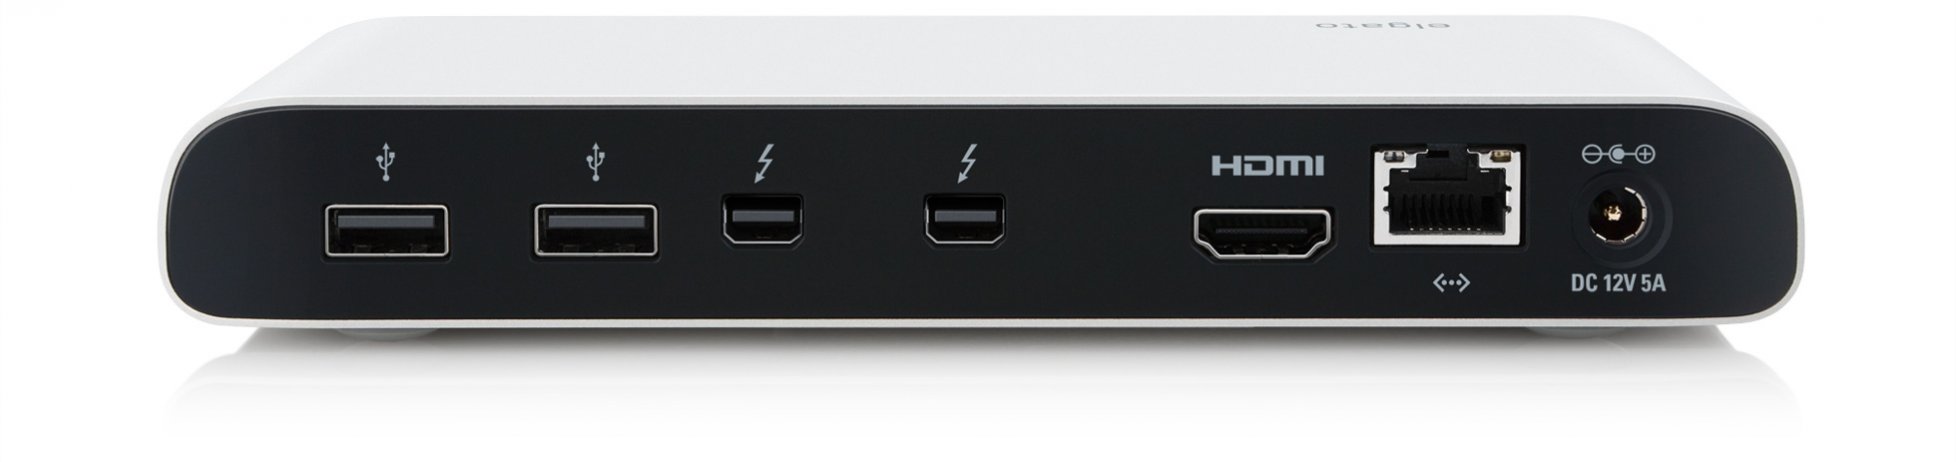 Elgato launches Thunderbolt Dock, a beautiful base for those who want to expand notebook connections